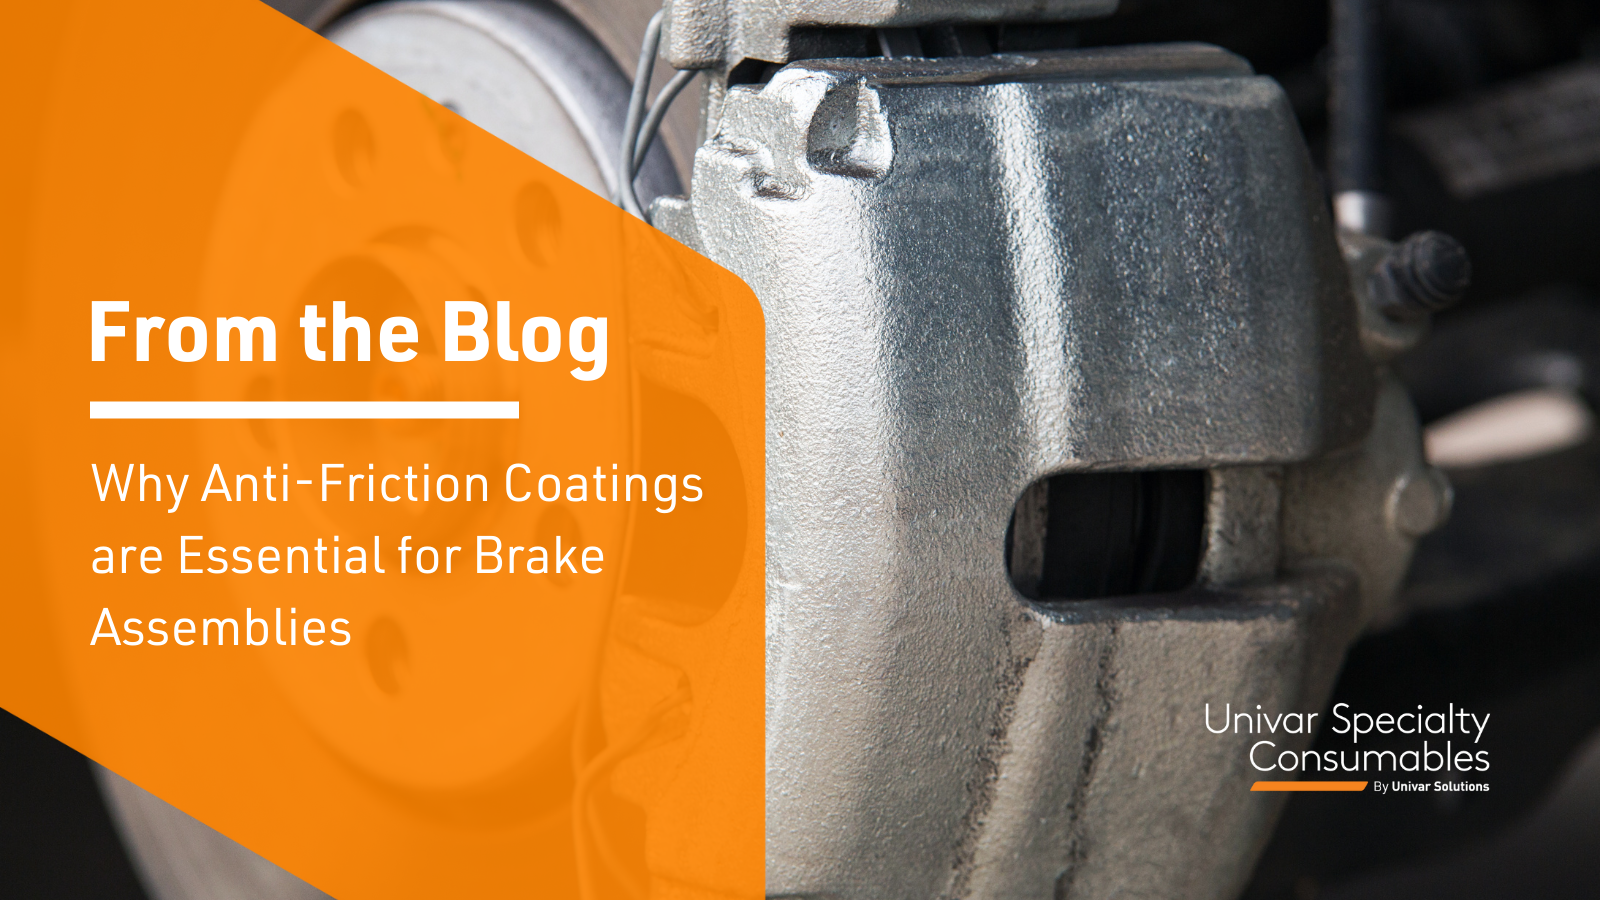 Why Anti-Friction Coatings are Essential for Brake Assemblies